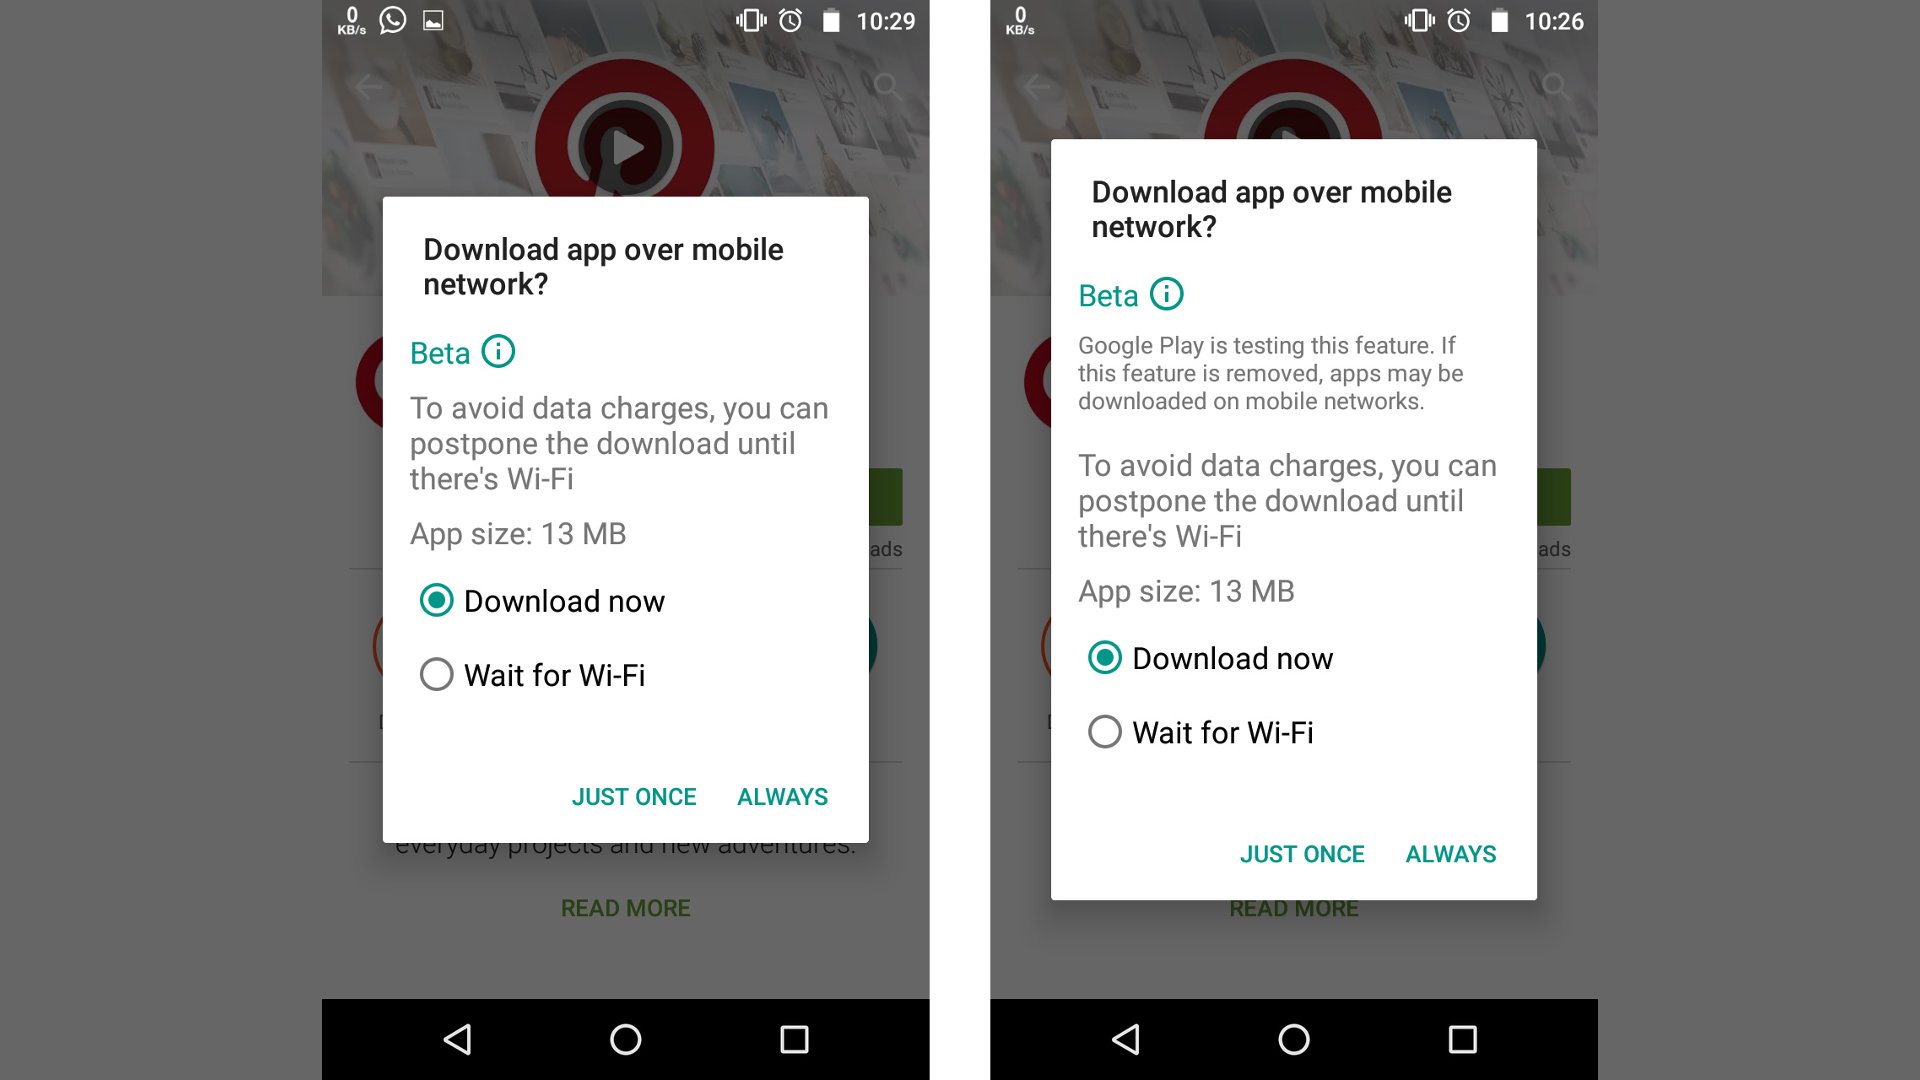 Option To Queue Play Store Downloads When Wi-Fi Is Available